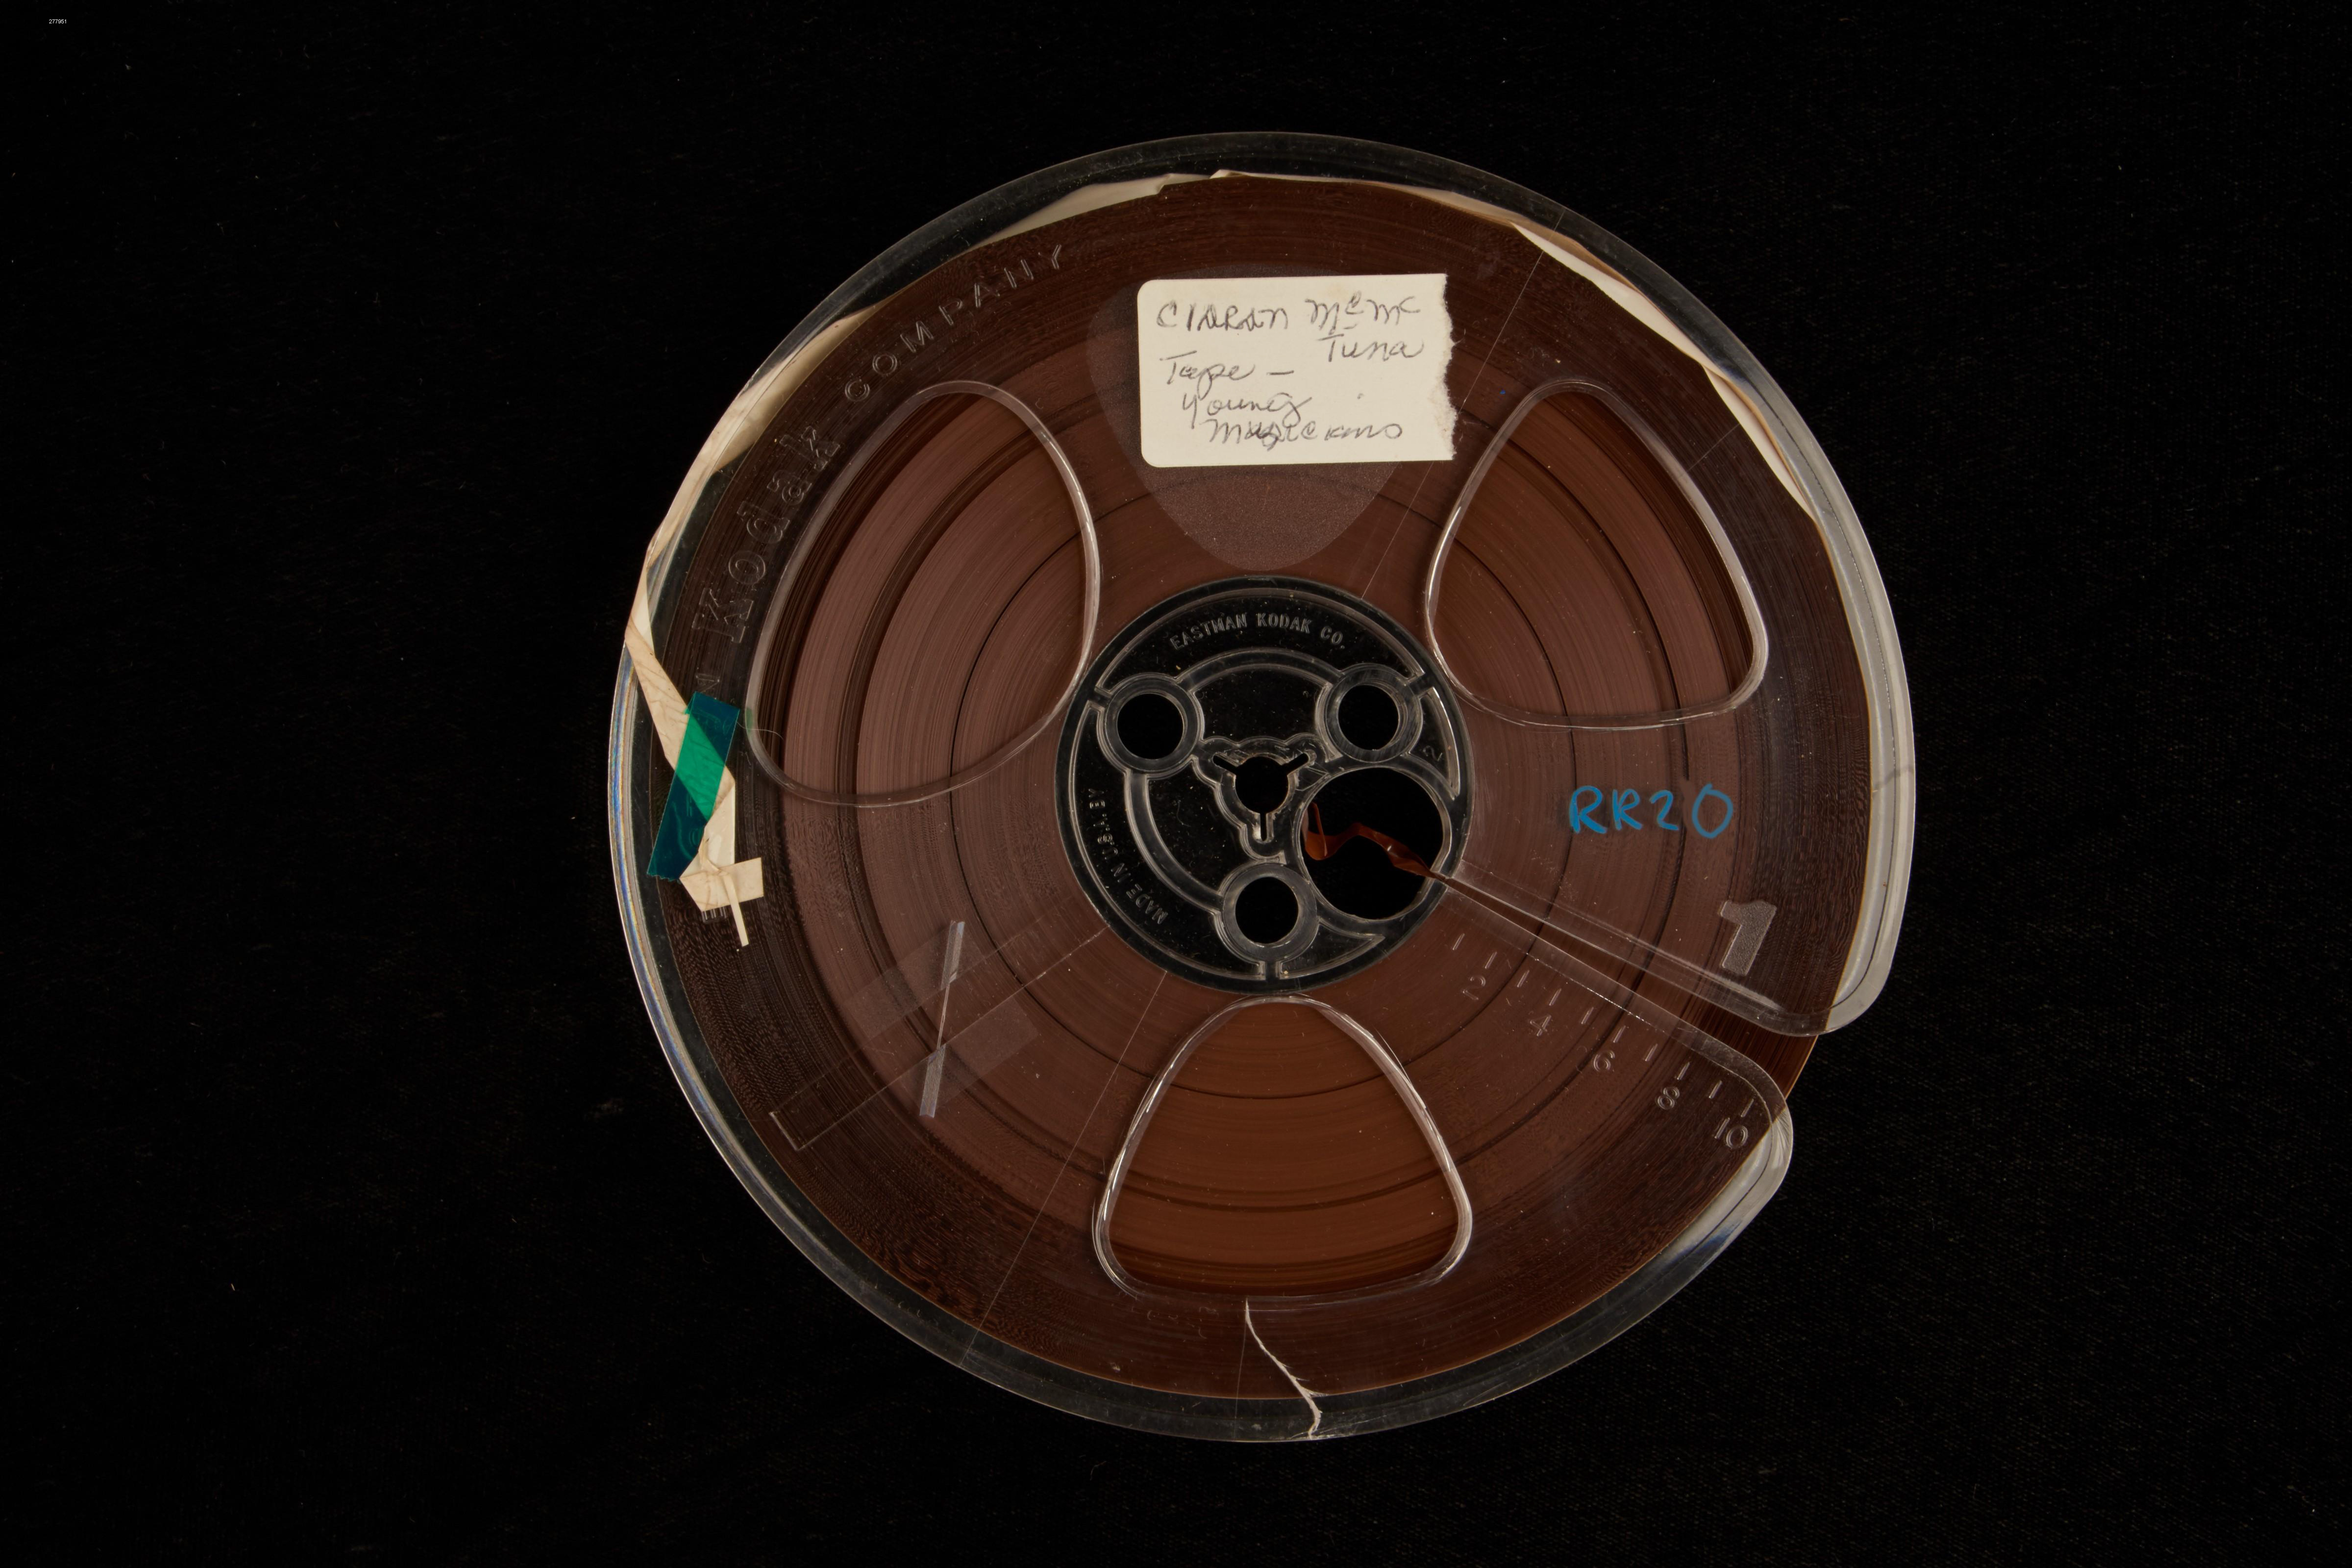 An audio reel, with a piece of tape on it that has Ciarán Mac Mathúna's name written on it.